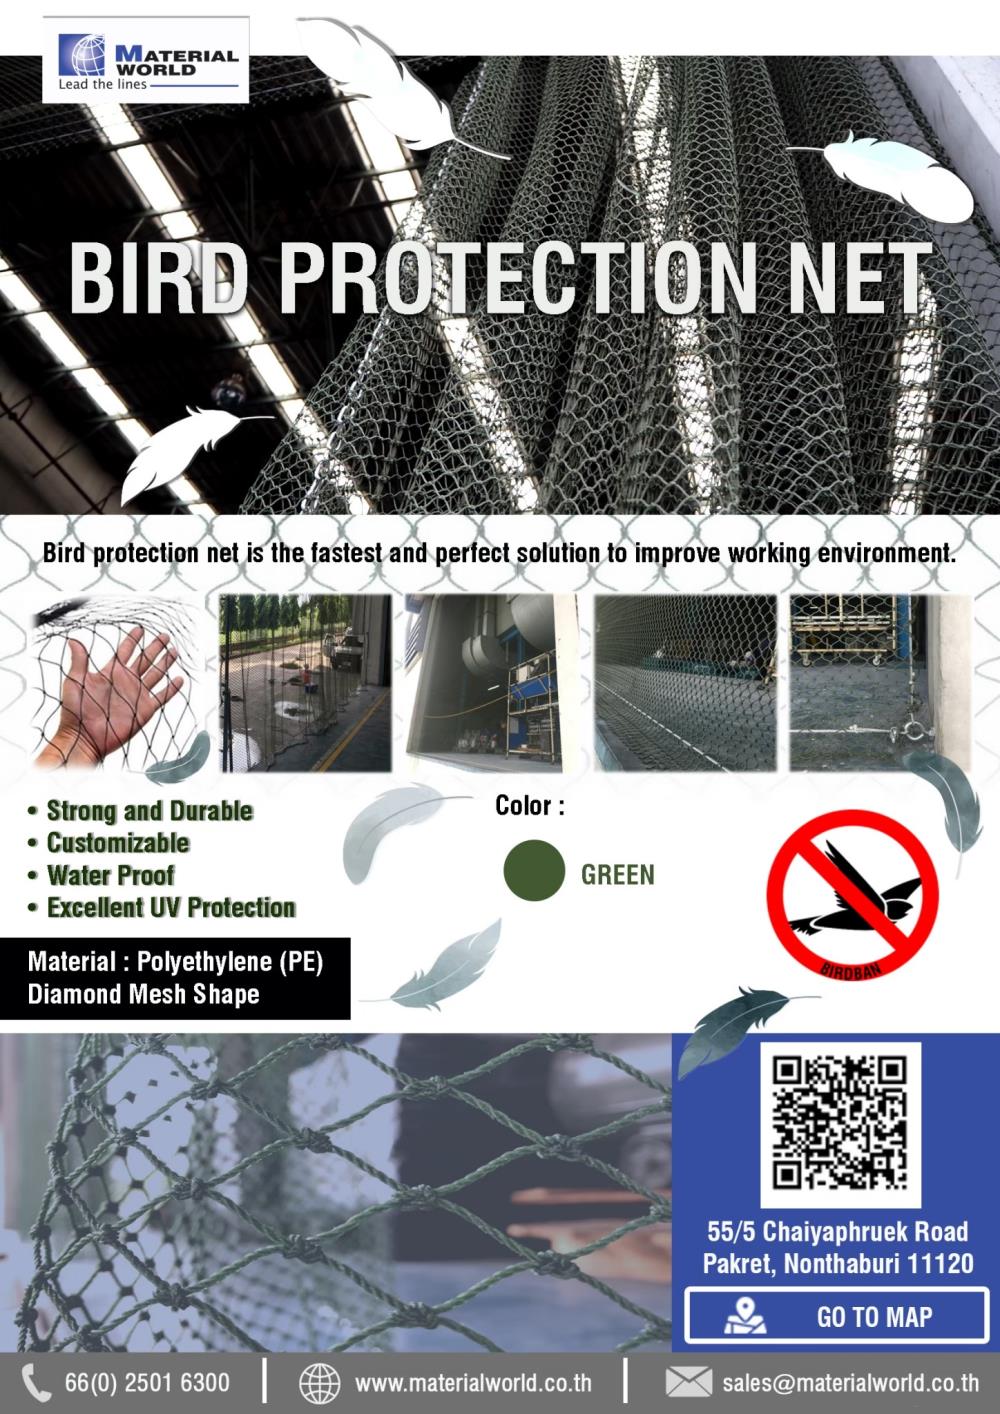 Bird Protection,Warehouse protection,Material World,Construction and Decoration/Wall Protection